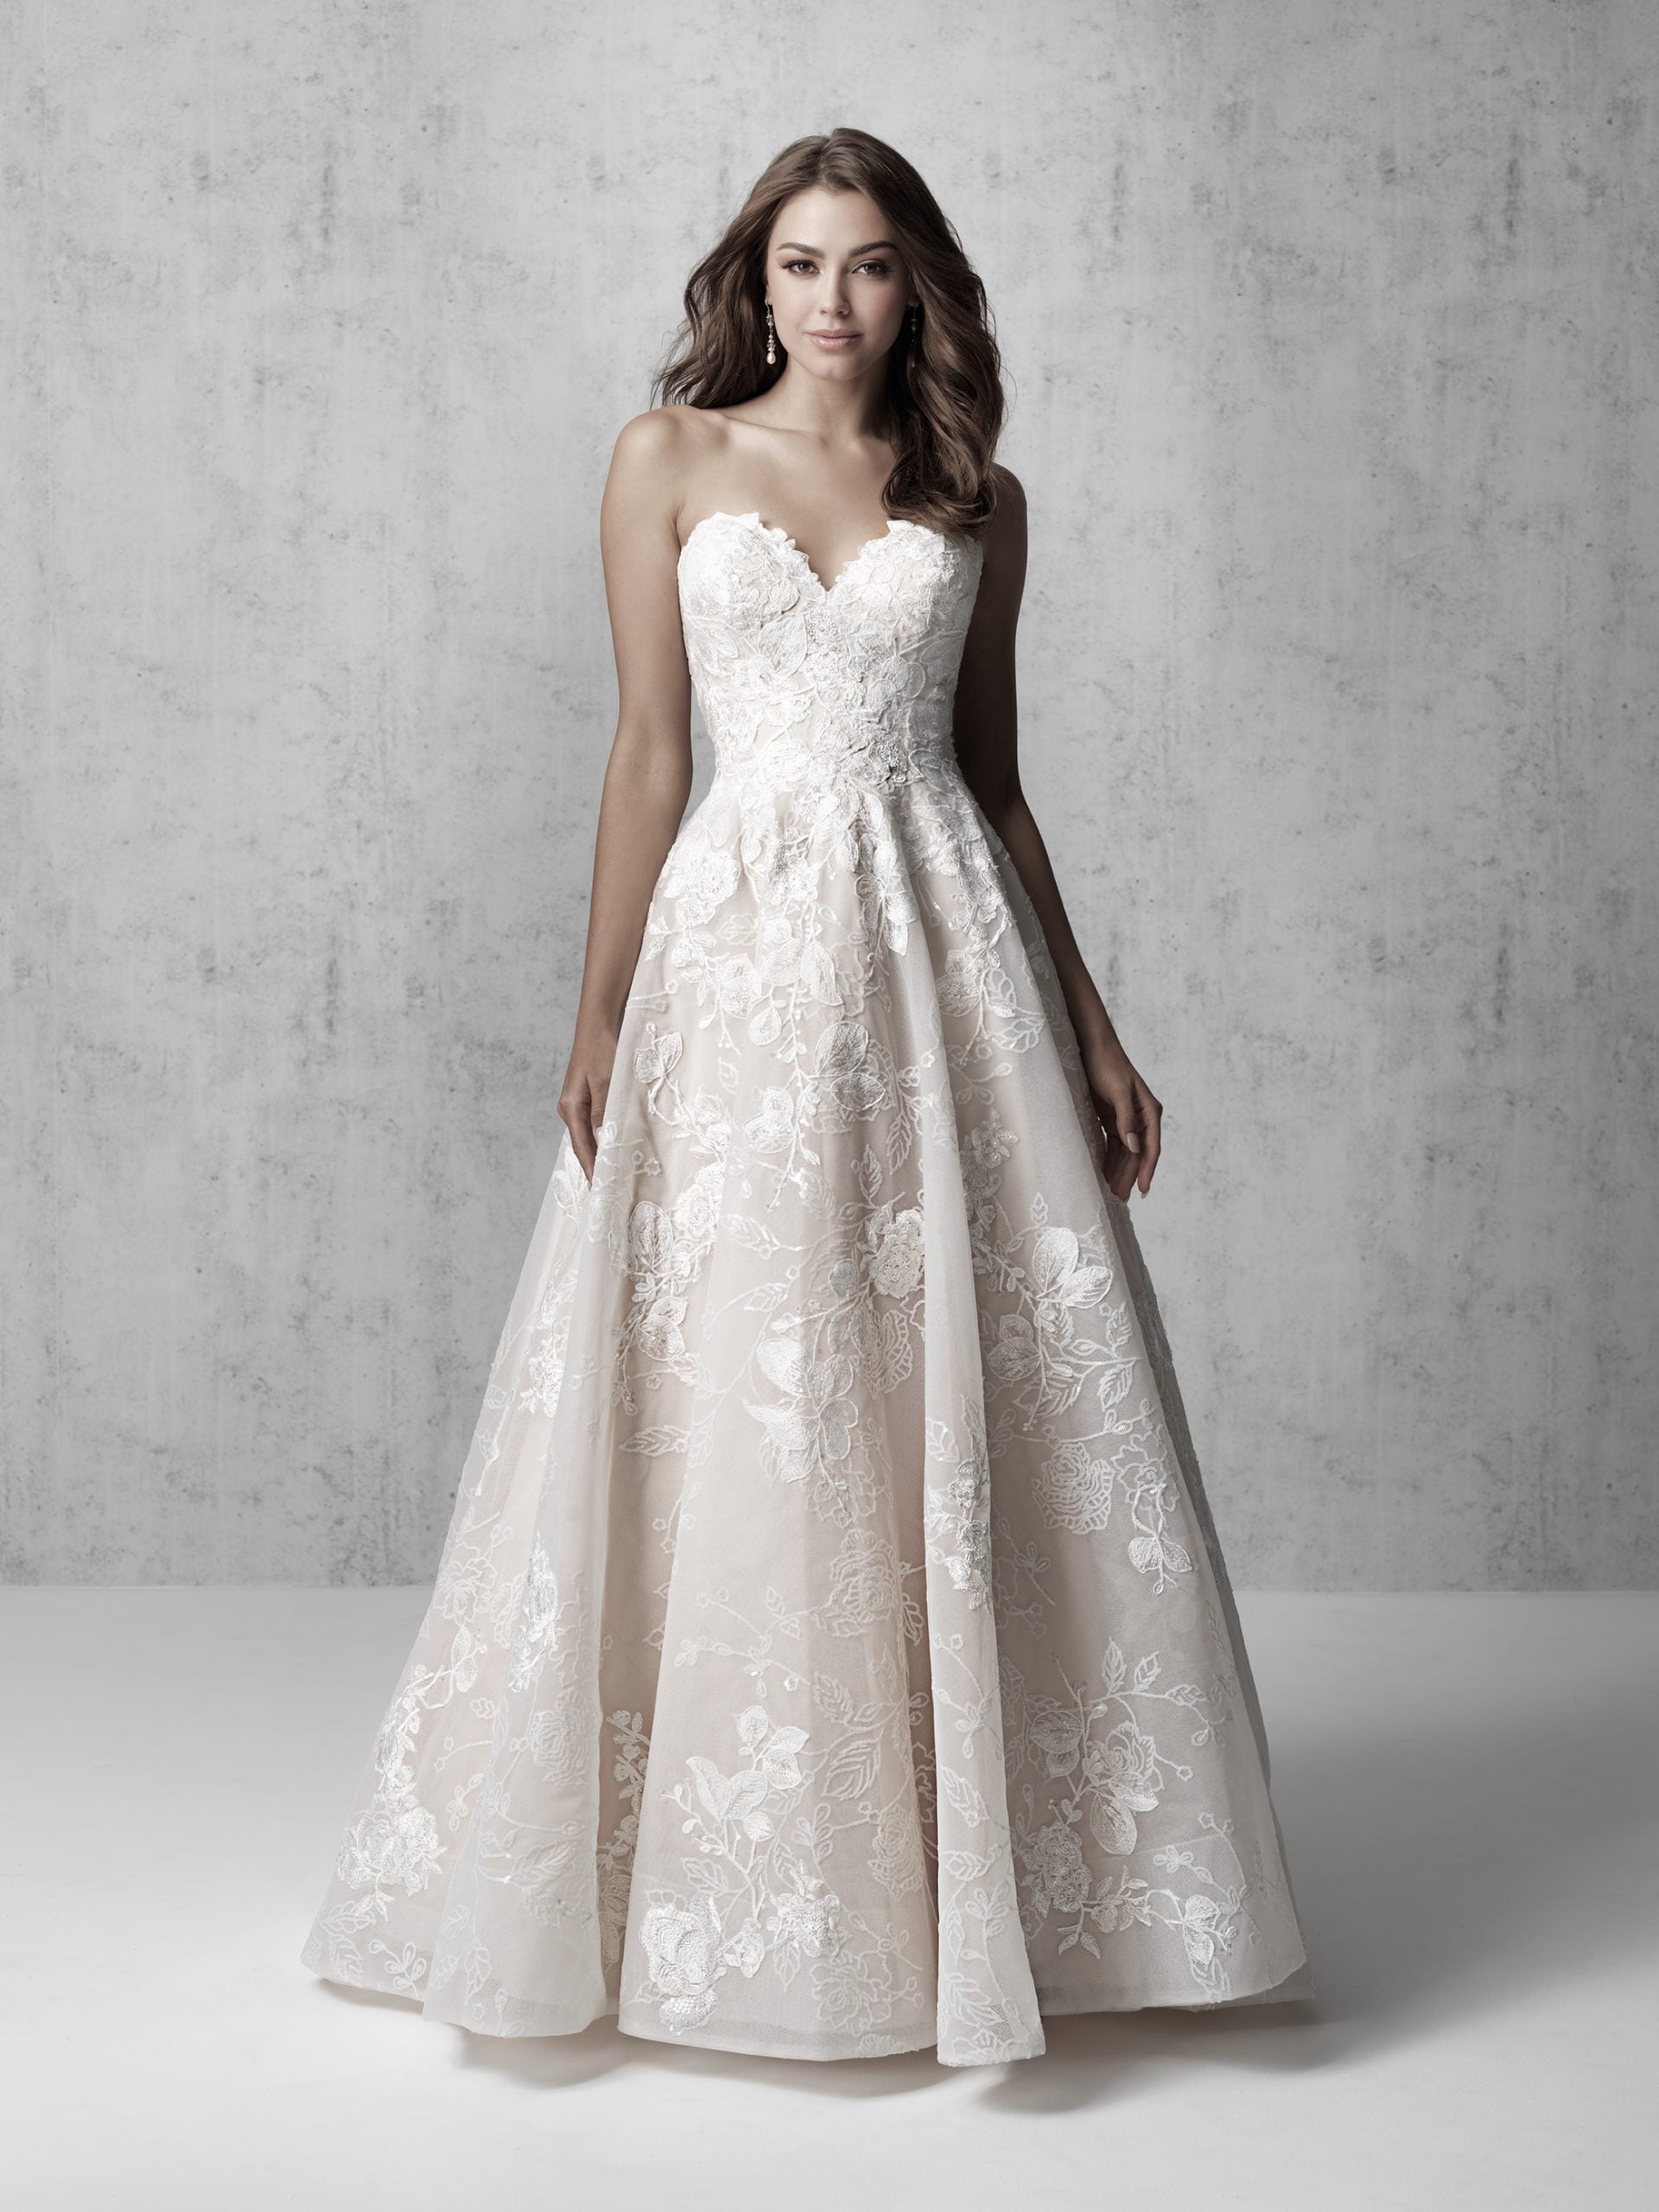 Strapless Lace Applique Ball Gown ...